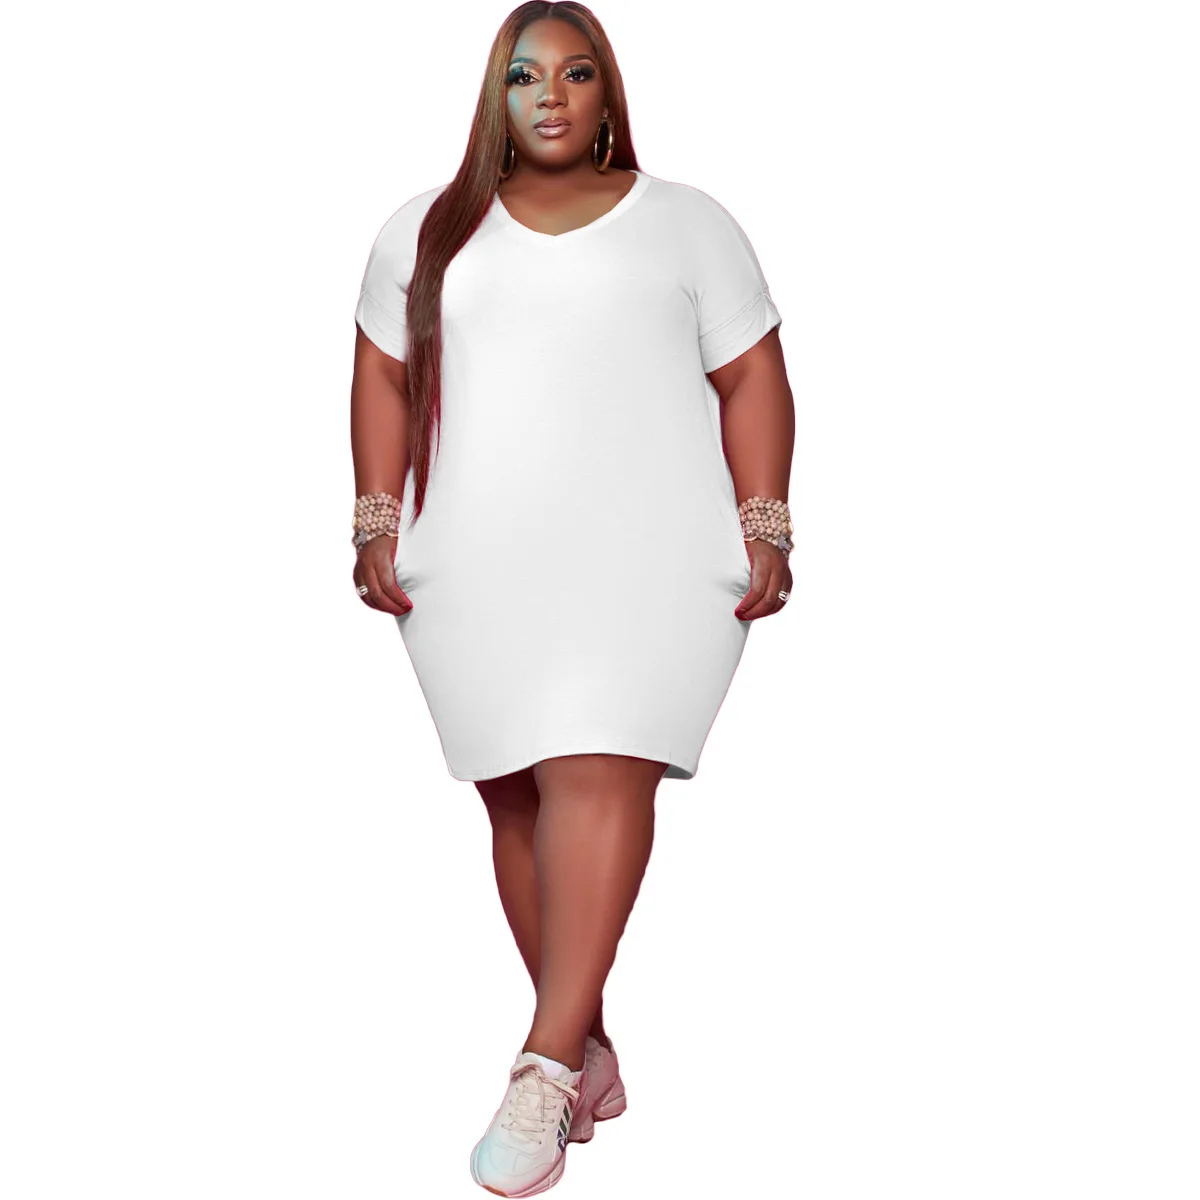 HAOOHU Women Clothing Plus Size Dresses 2021 Solid Casual Knee-length Dress Loose Short Sleeve V-neck Pullover Pockets Urban 5XL plus size square neck pockets design pullover